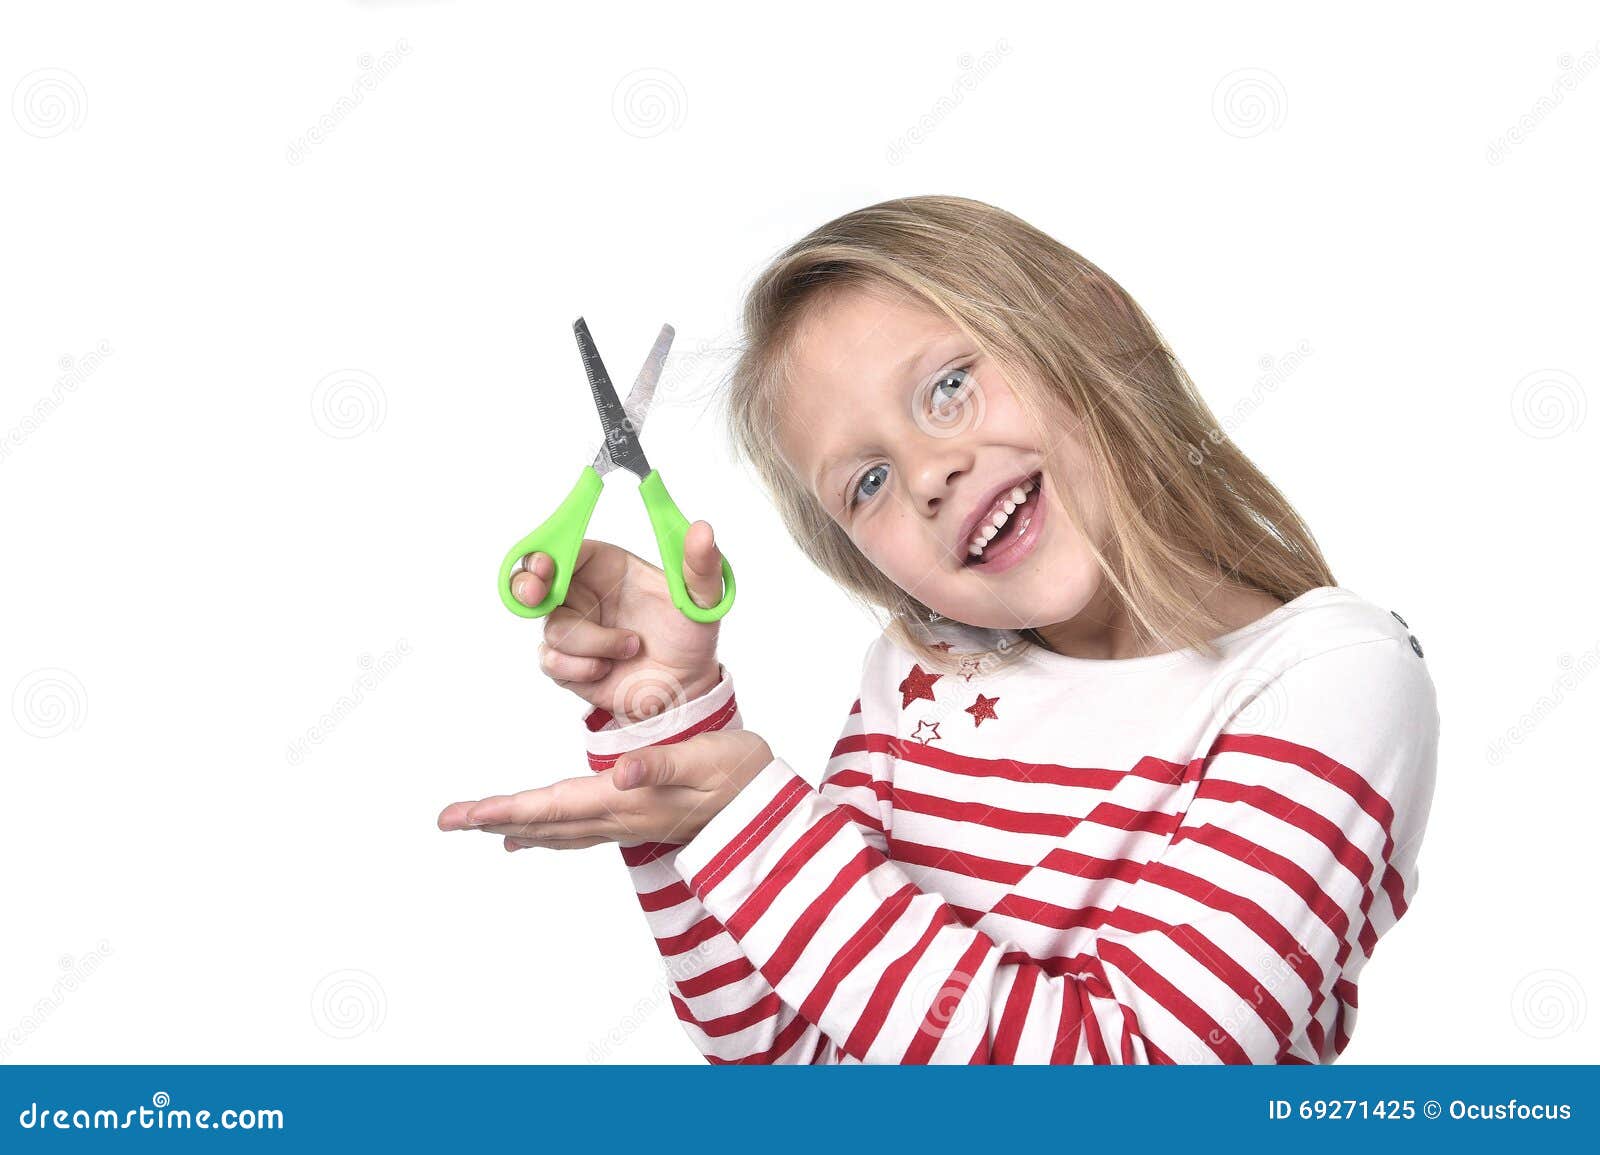 https://thumbs.dreamstime.com/z/sweet-beautiful-female-child-to-years-old-holding-cutting-scissors-school-supplies-concept-cute-blonde-hair-blue-eyes-69271425.jpg